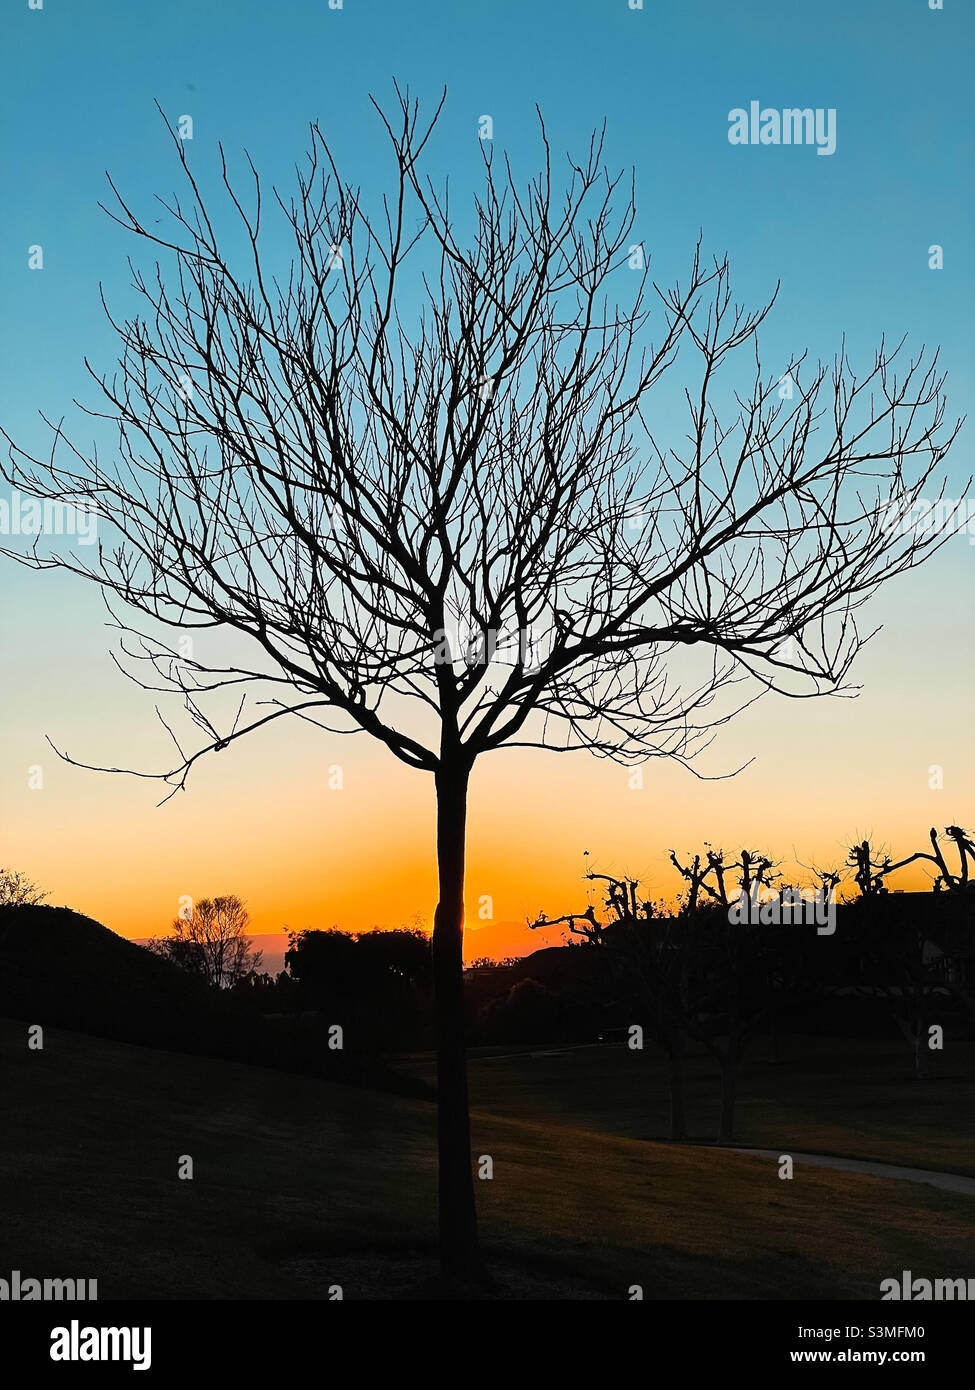 Silhouette of a bare tree at sunset. Stock Photo